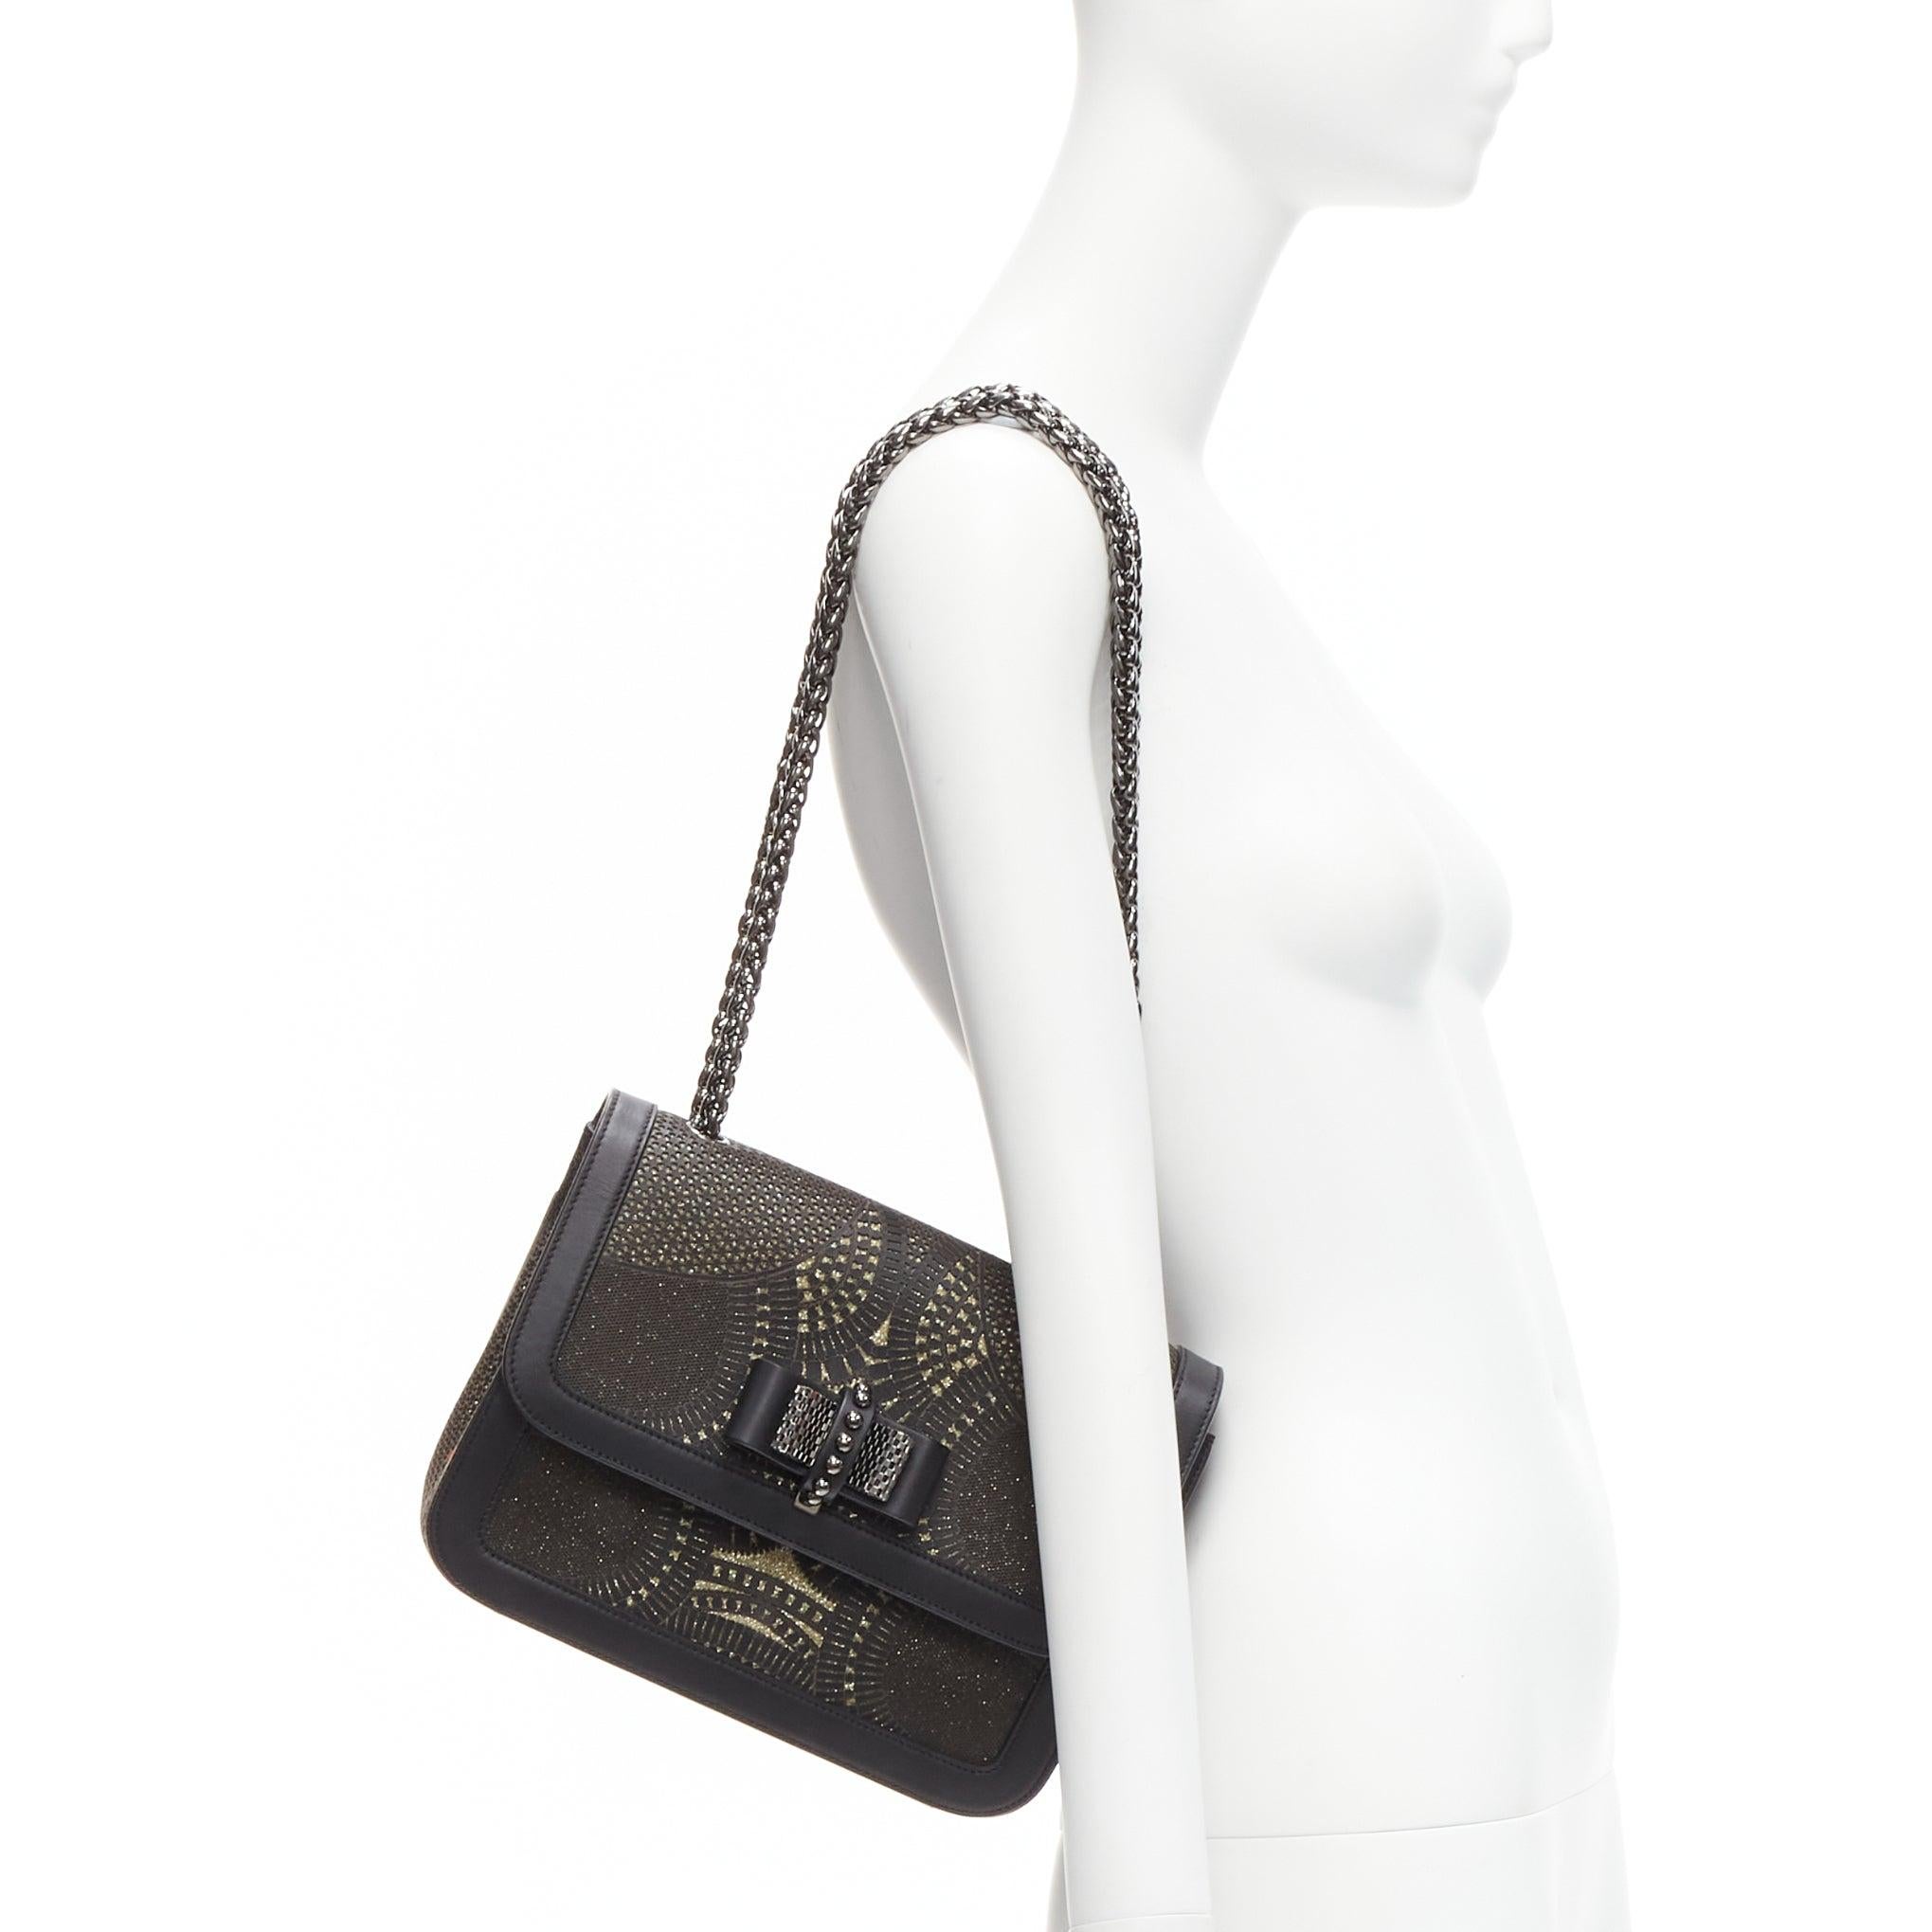 CHRISTIAN LOUBOUTIN Sweet Charity black gold glitter lasercut flap shoulder bag
Reference: TGAS/D00688
Brand: Christian Louboutin
Model: Sweet Charity
Material: Leather
Color: Gold, Black
Pattern: Solid
Closure: Push Lock
Lining: Red Fabric
Extra